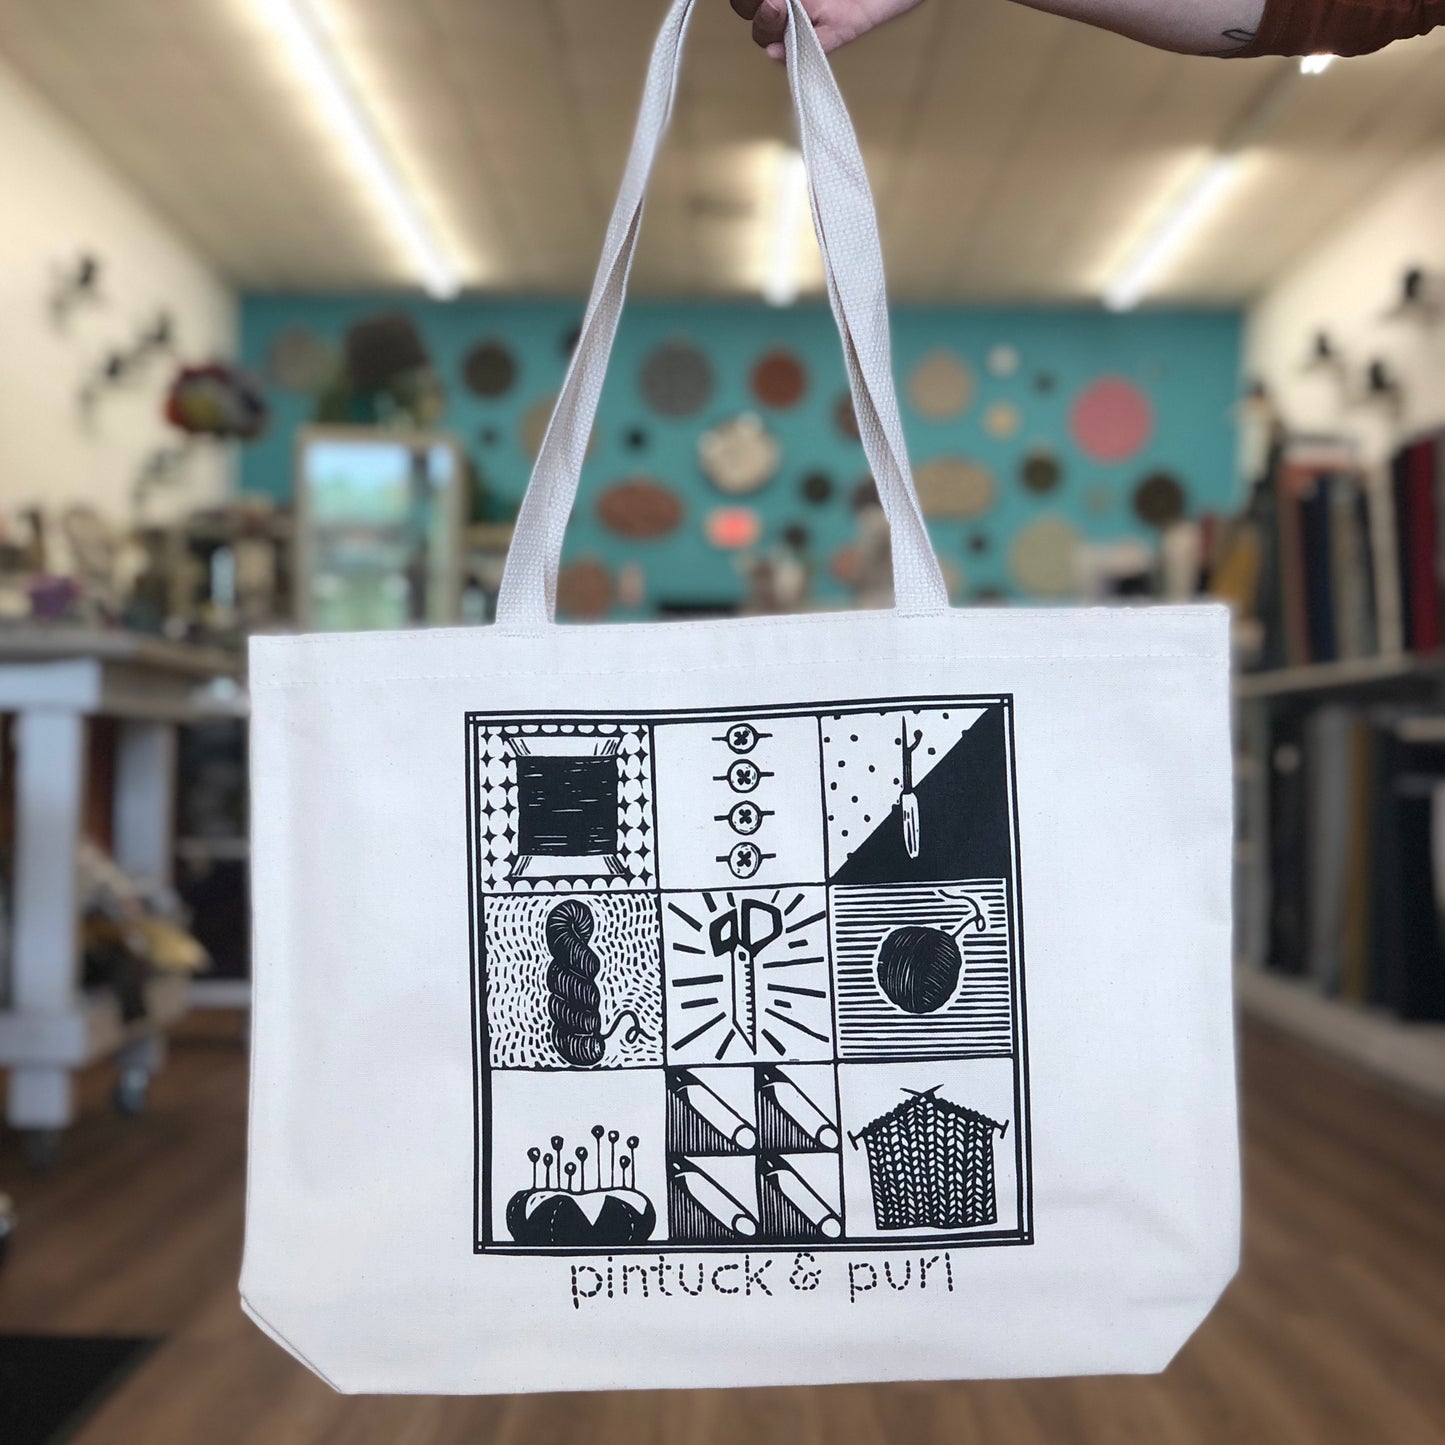 Makers Day Bag 2020